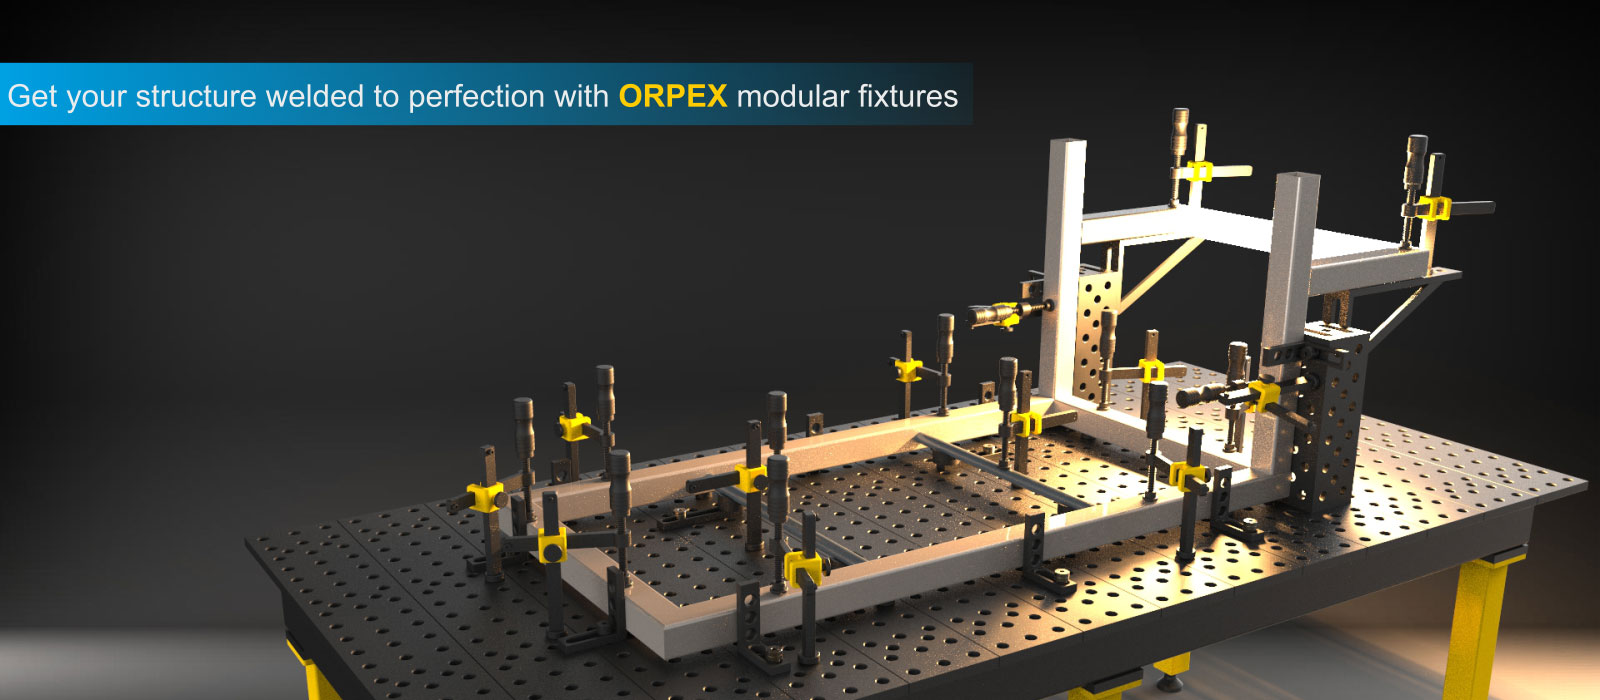 Hero Slider Image 1 | Get your struture welded to perfection with Orpex Modular Fixtures